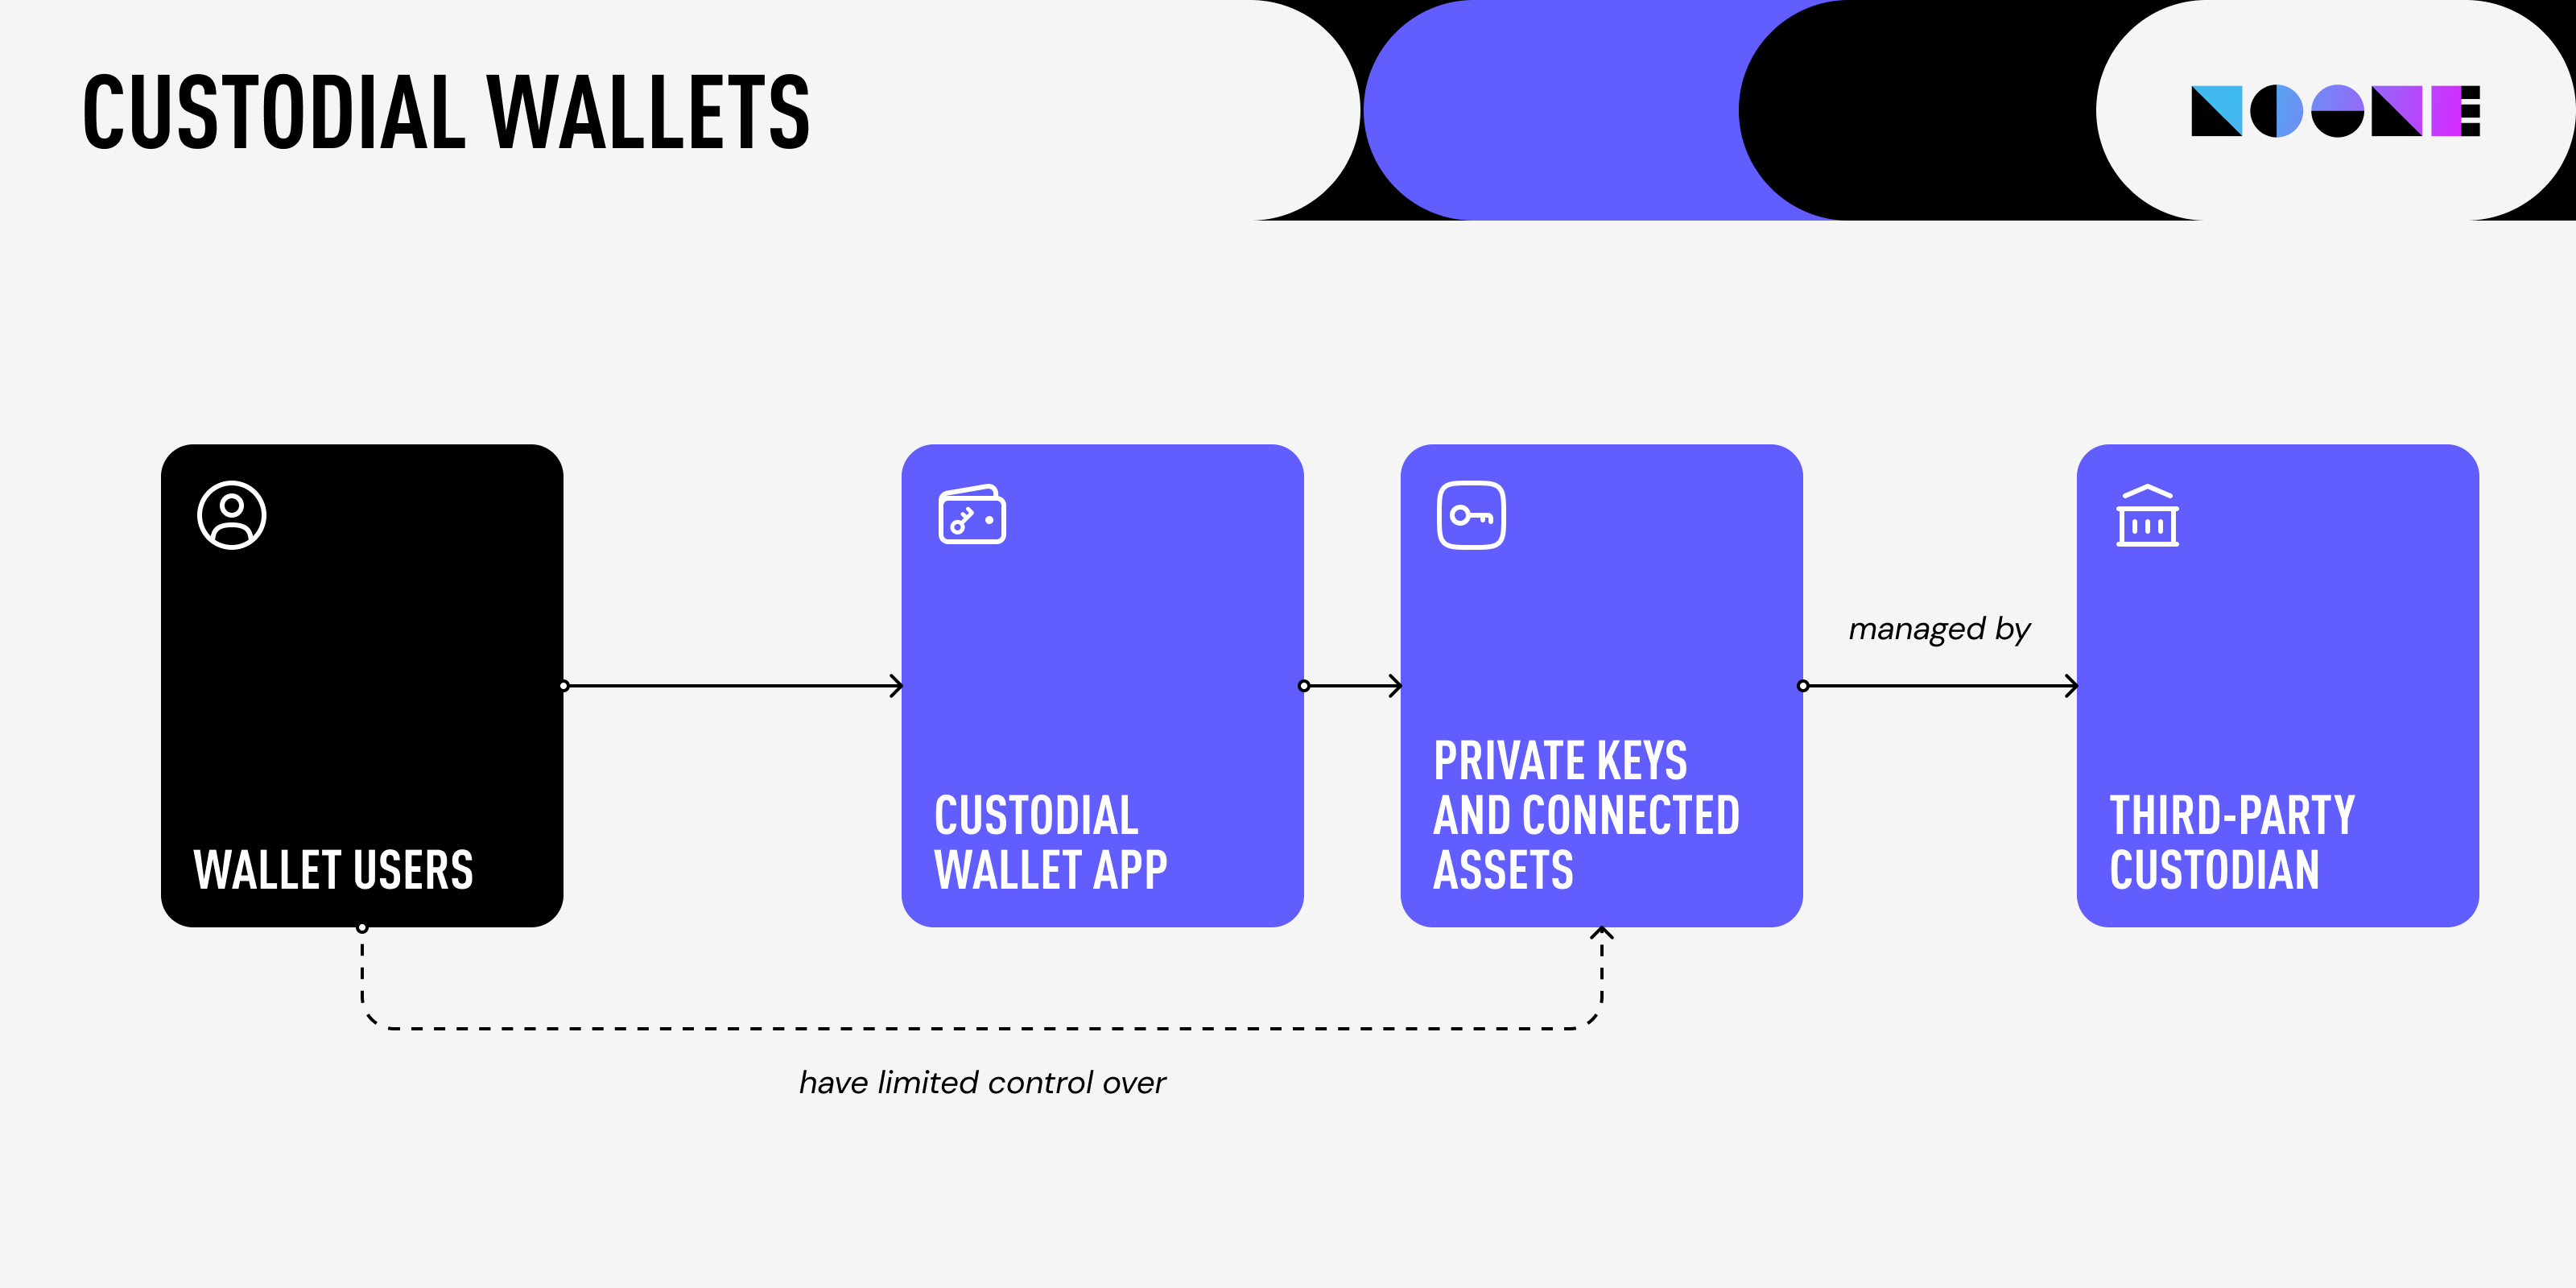 Infographic illustrating the governance structure of custodial wallets